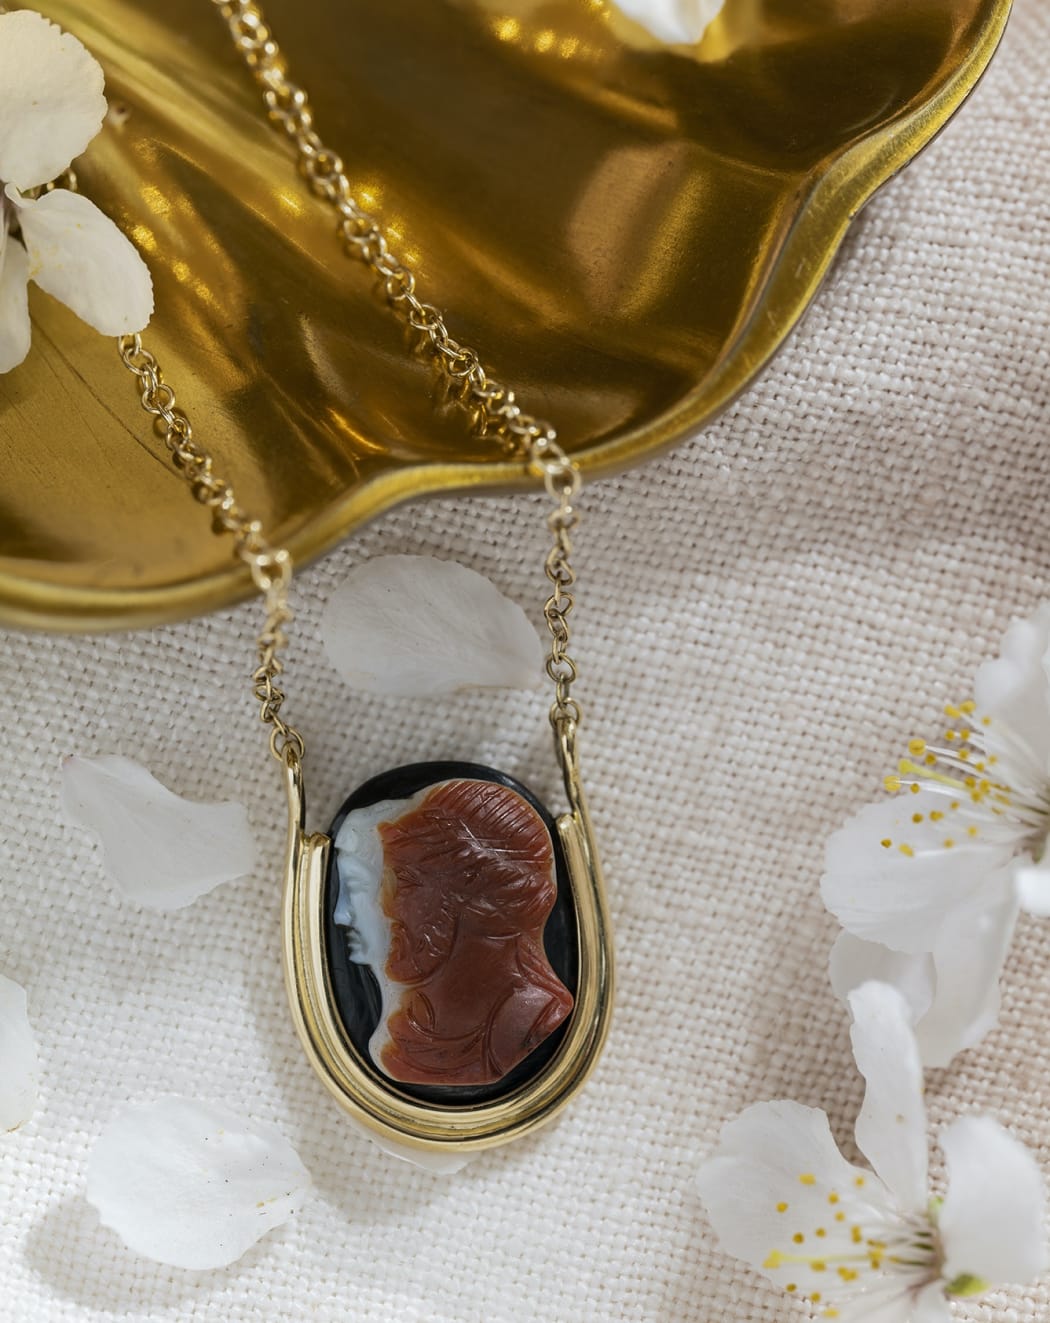 A Roman sardonyx cameo of jugate busts of Zeus and Hera, set in an 18ct gold pendant necklace. Circa 1st - 2nd century AD